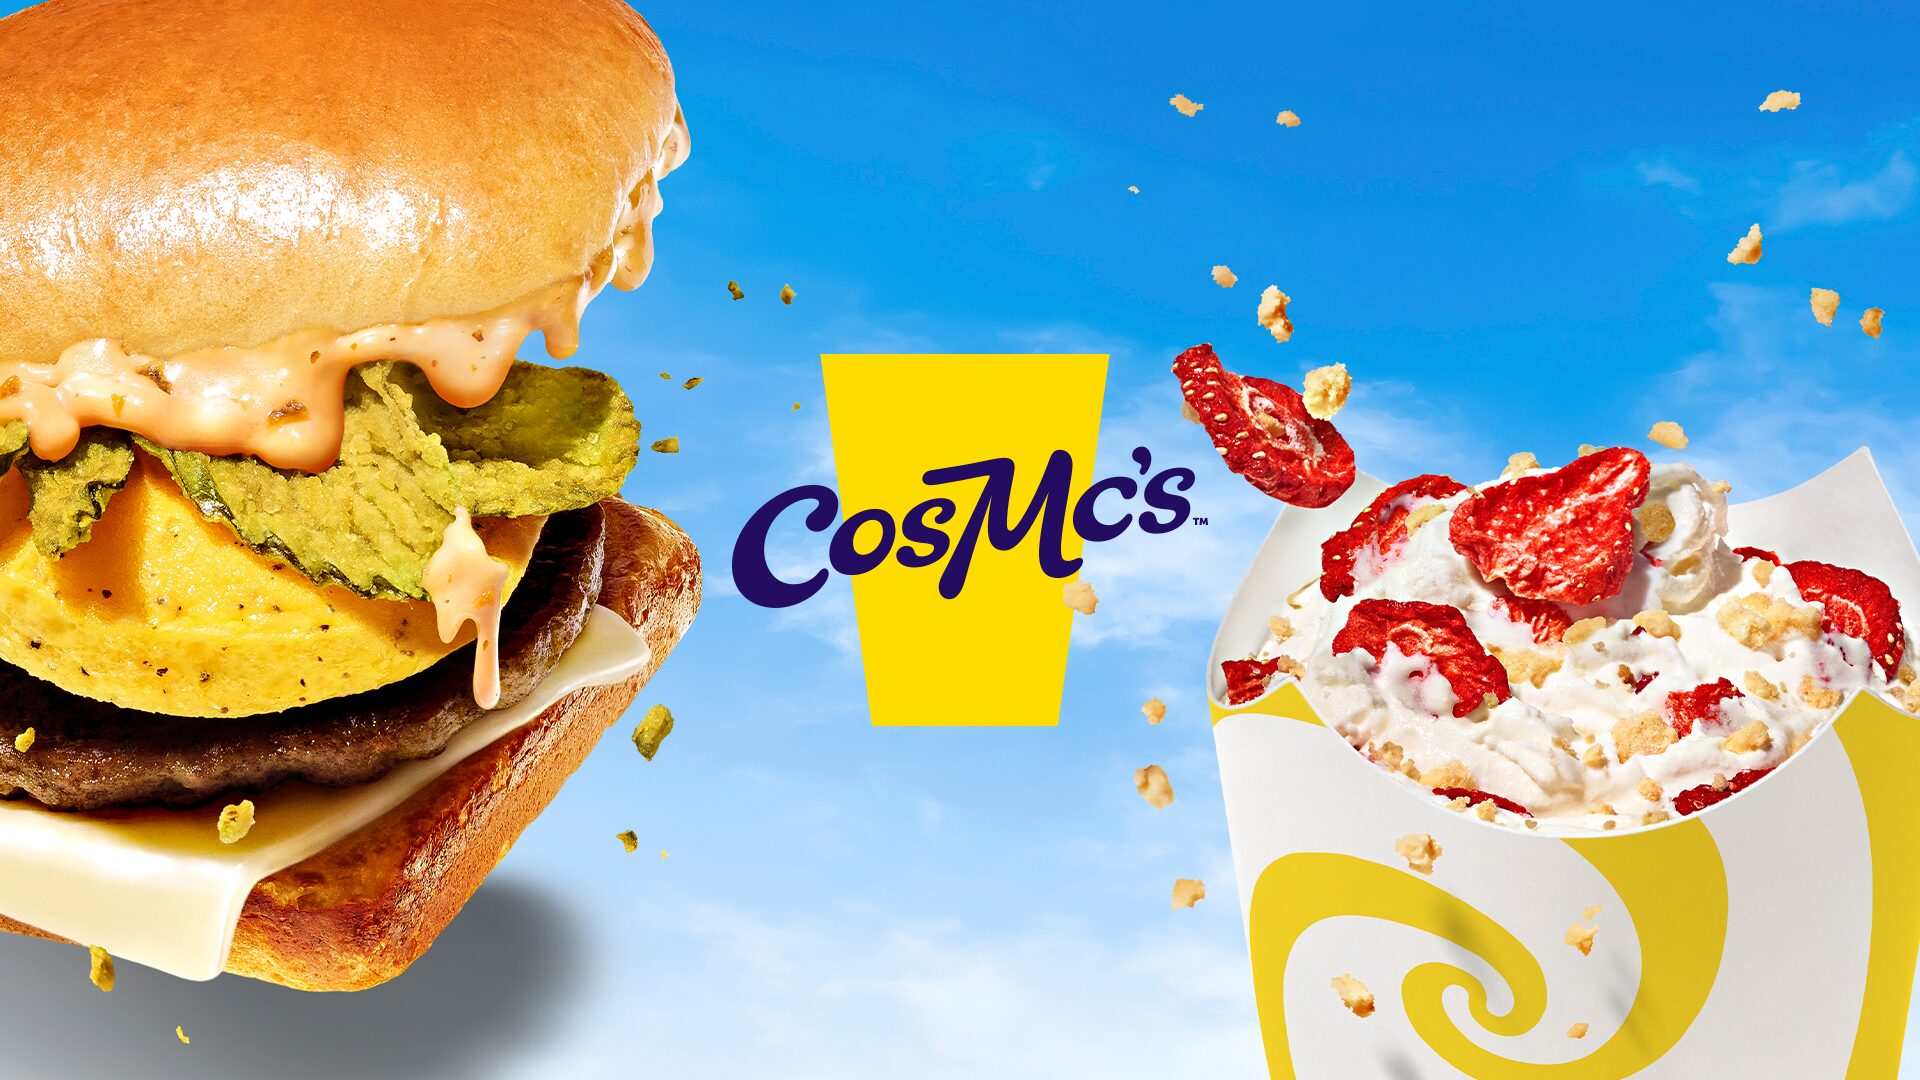 Image of a burger and McFlurry next to the CosMc's logo